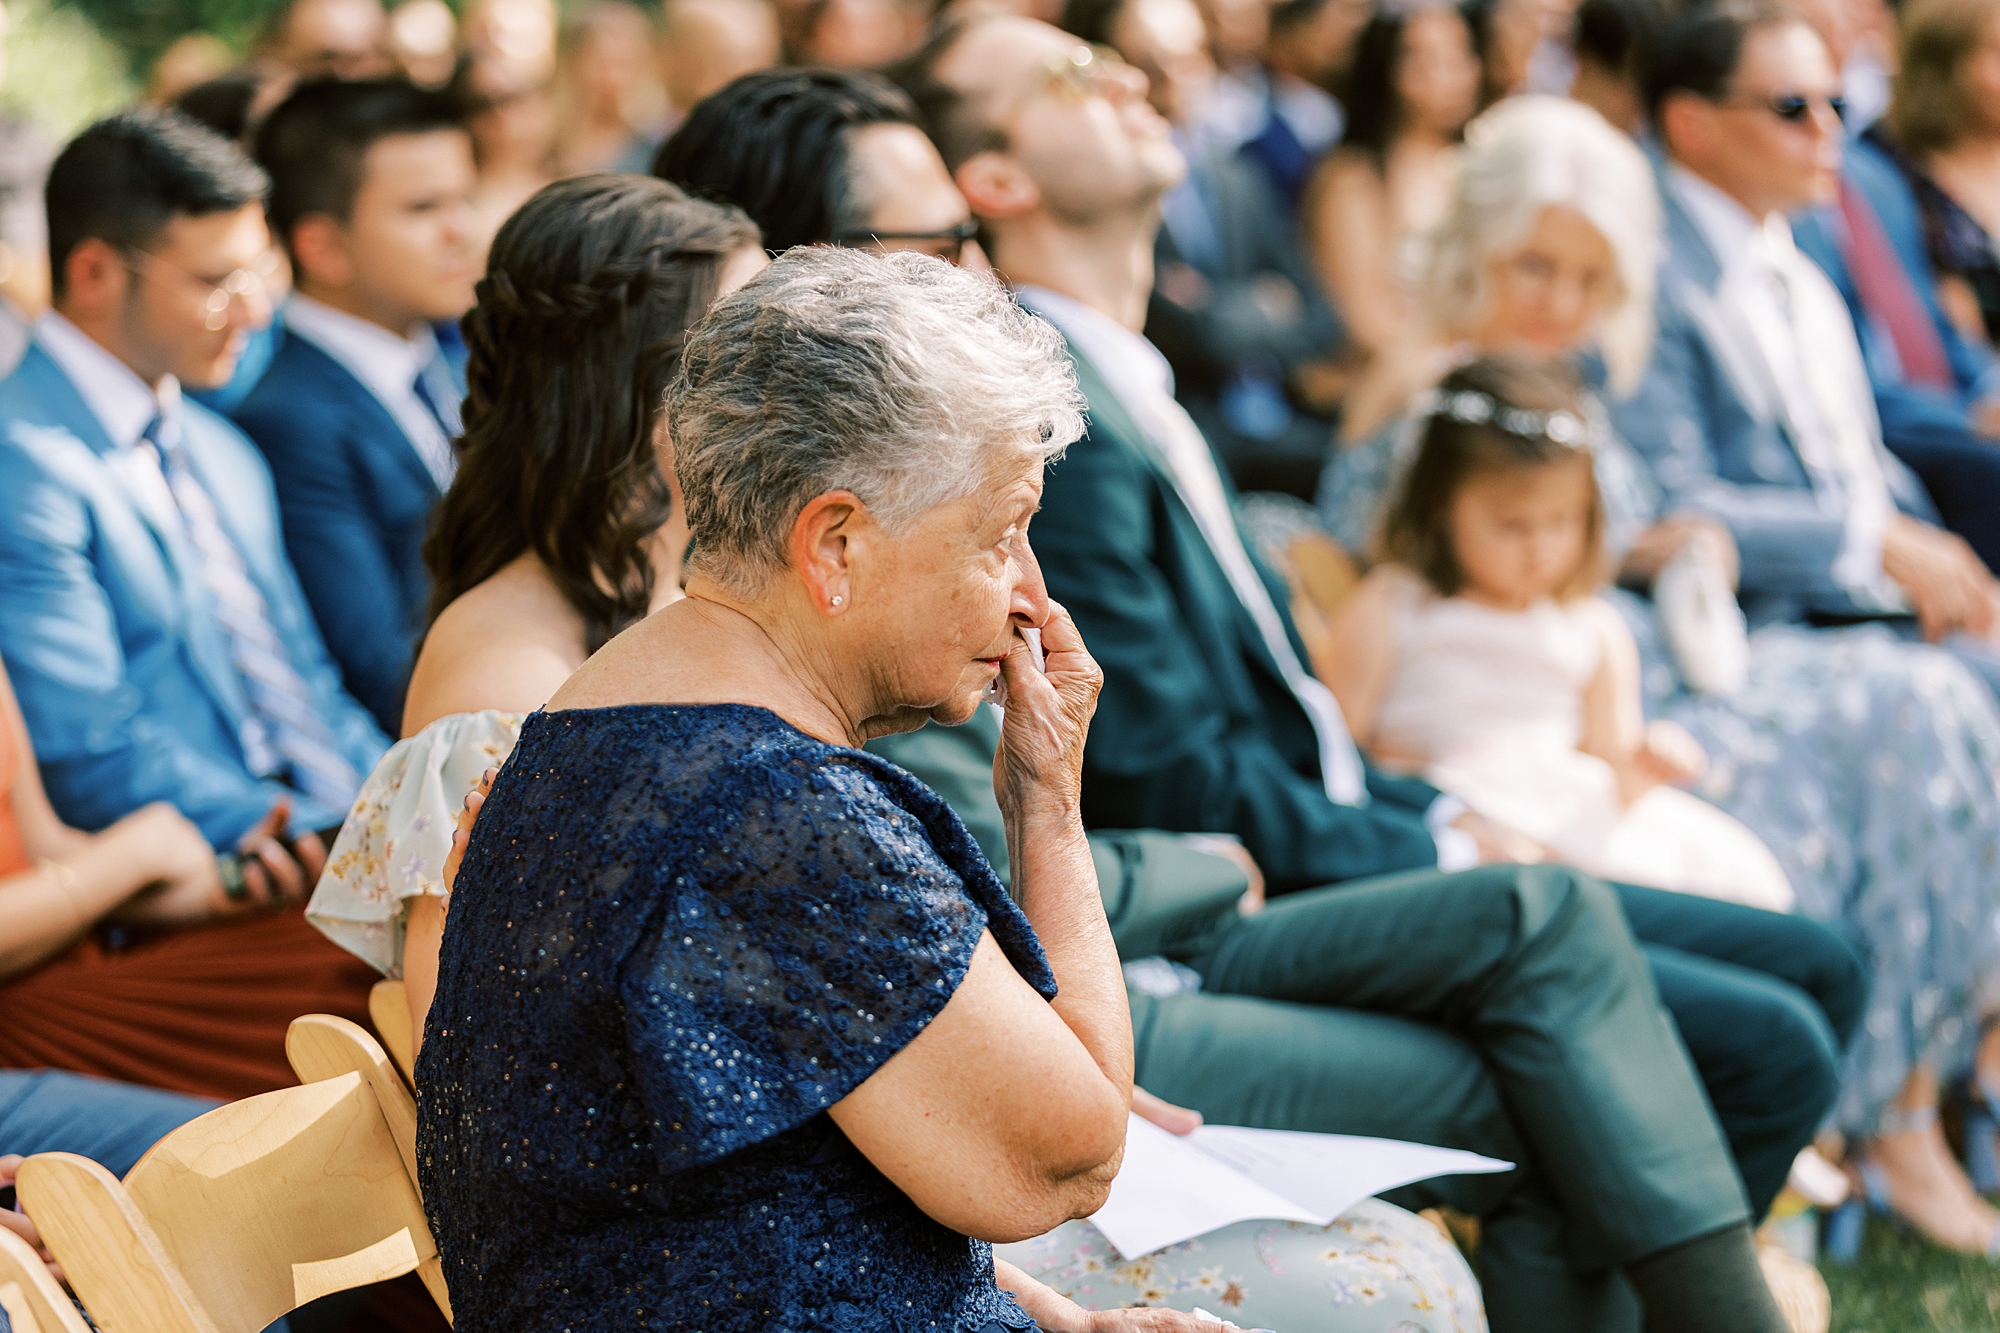 grandmother cries during wedding ceremony in garden at Bowman's Hill Wildflower Preserve